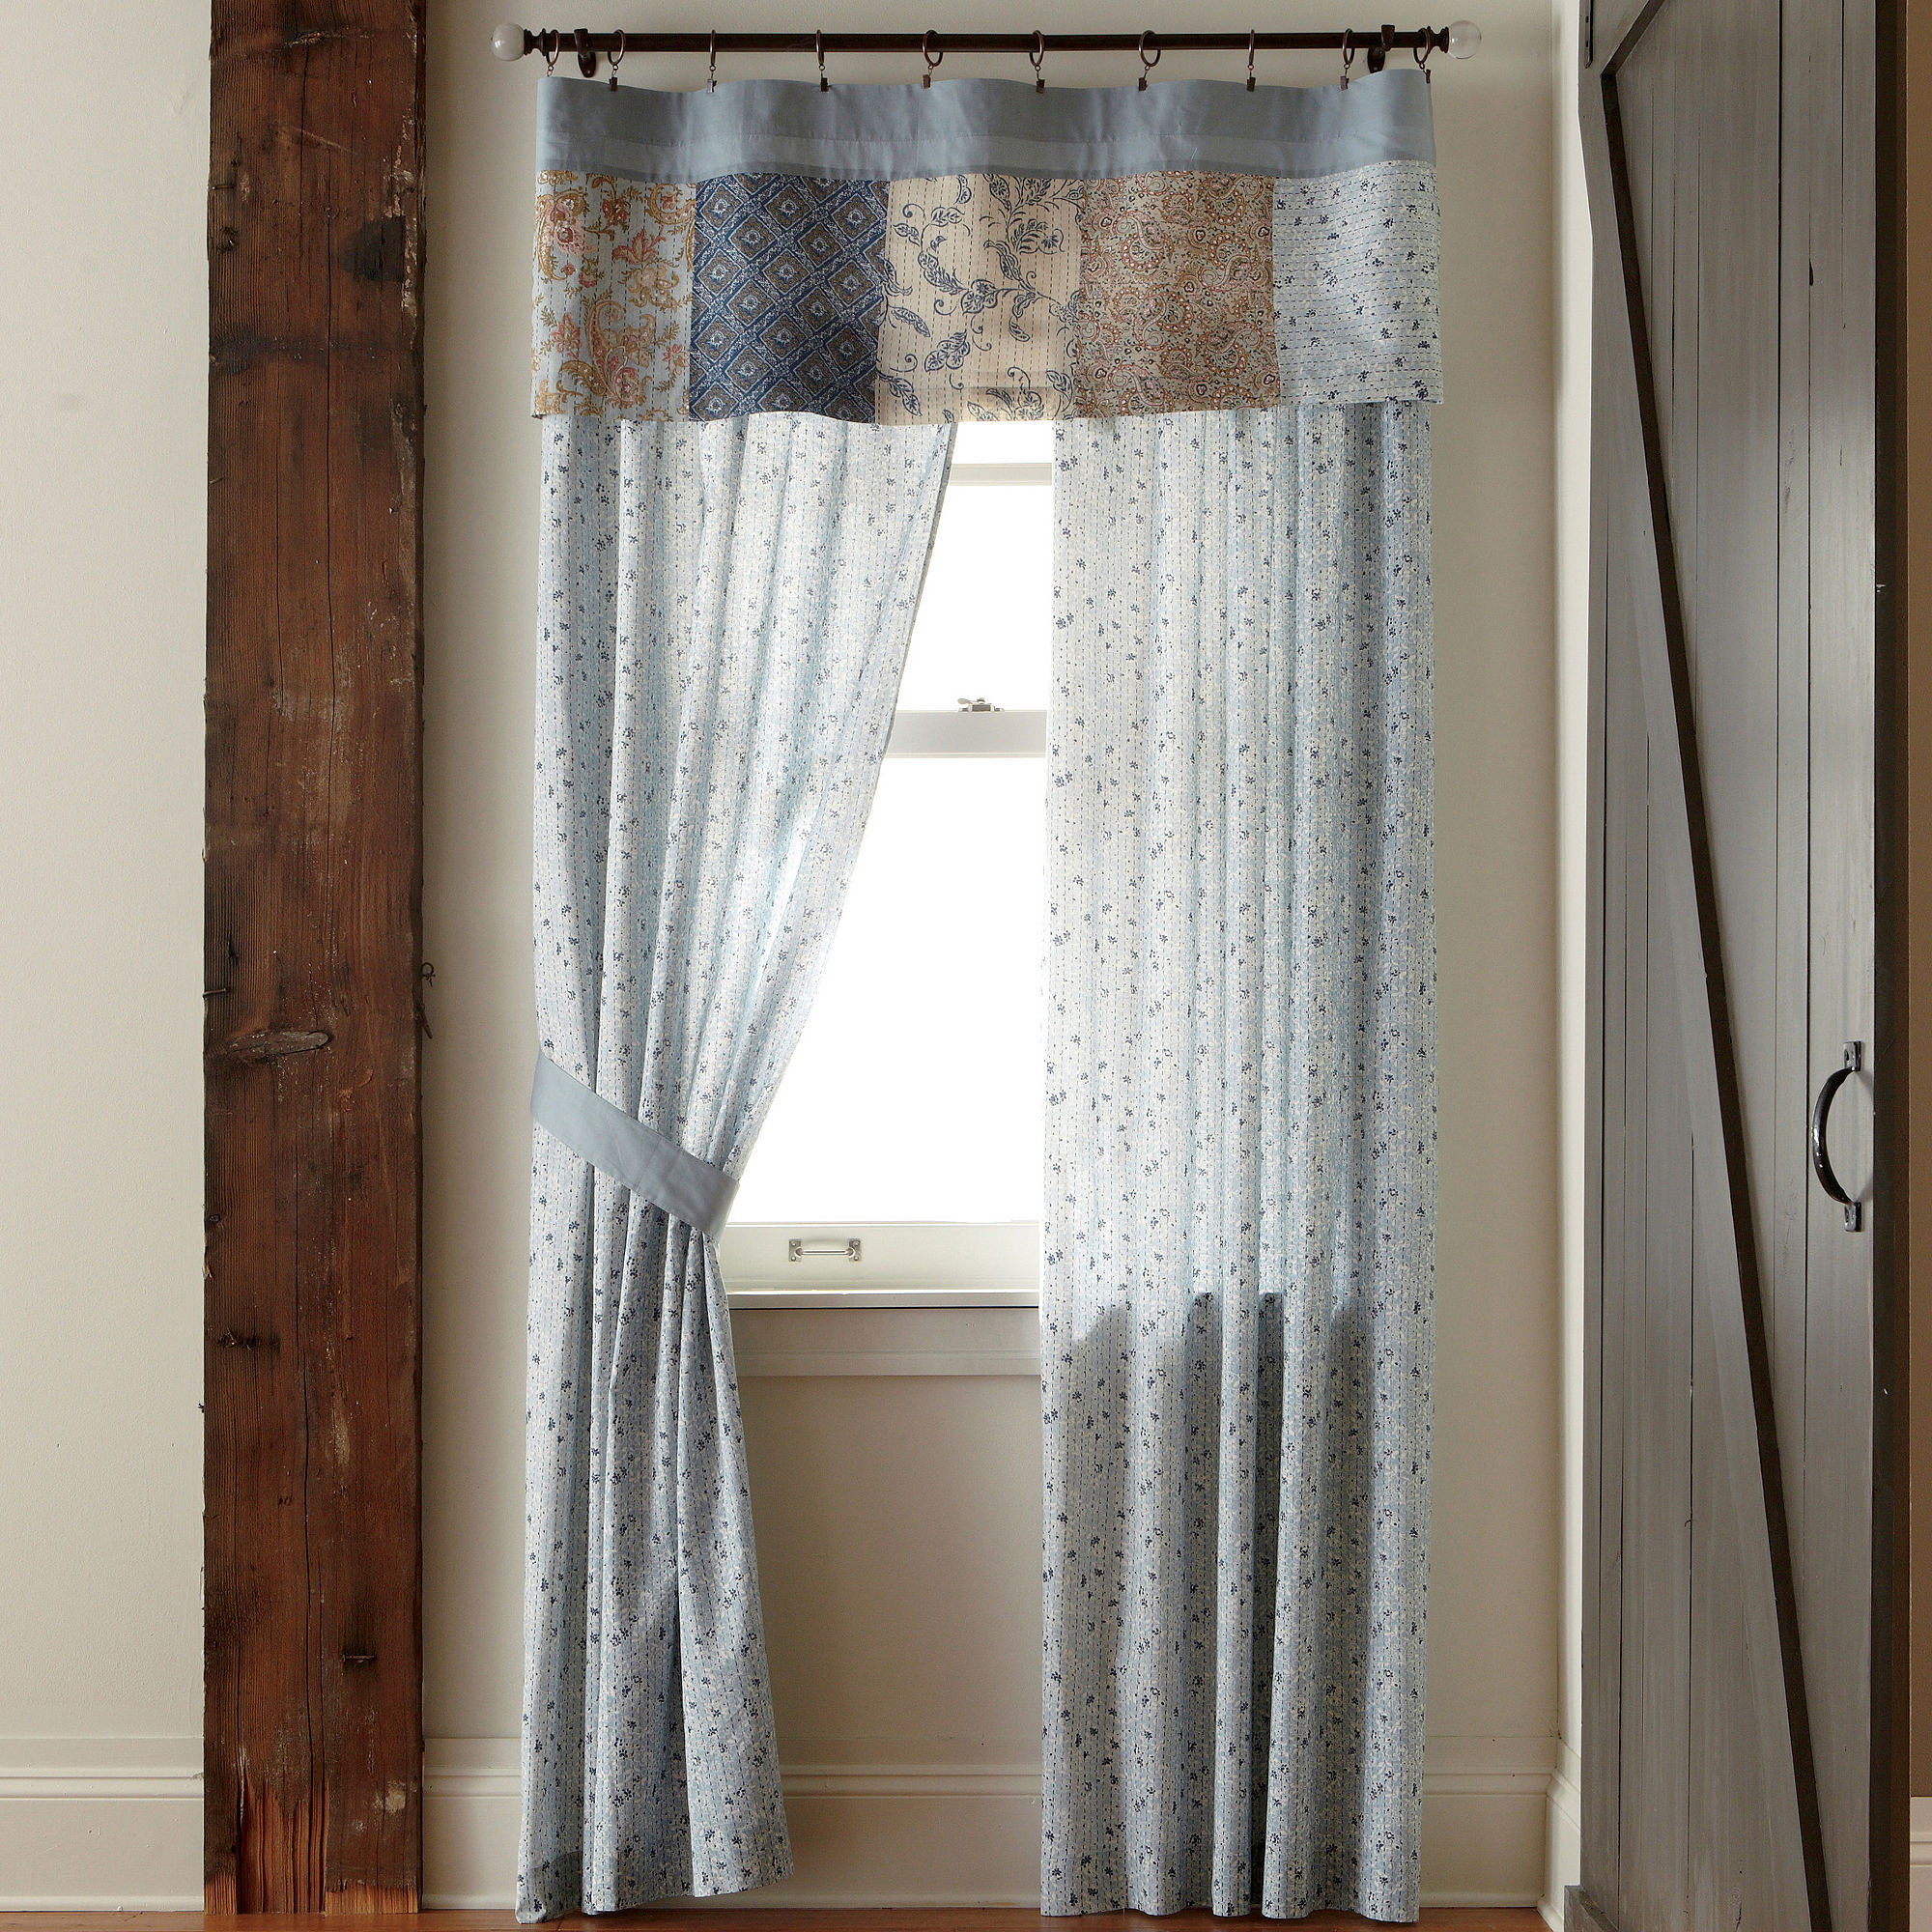 Kitchen Curtains At Jcpenney
 Curtain Elegant Interior Home Decorating Ideas With